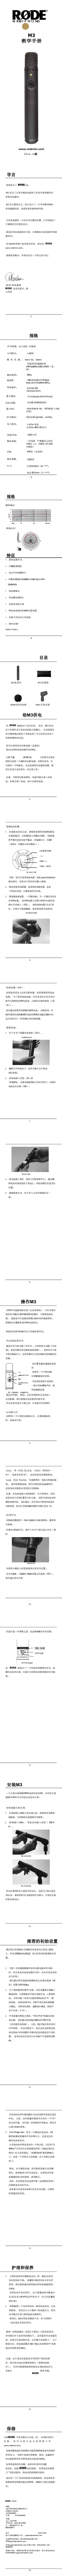 M3_product_manual_1_16_translate Chinese_0.png